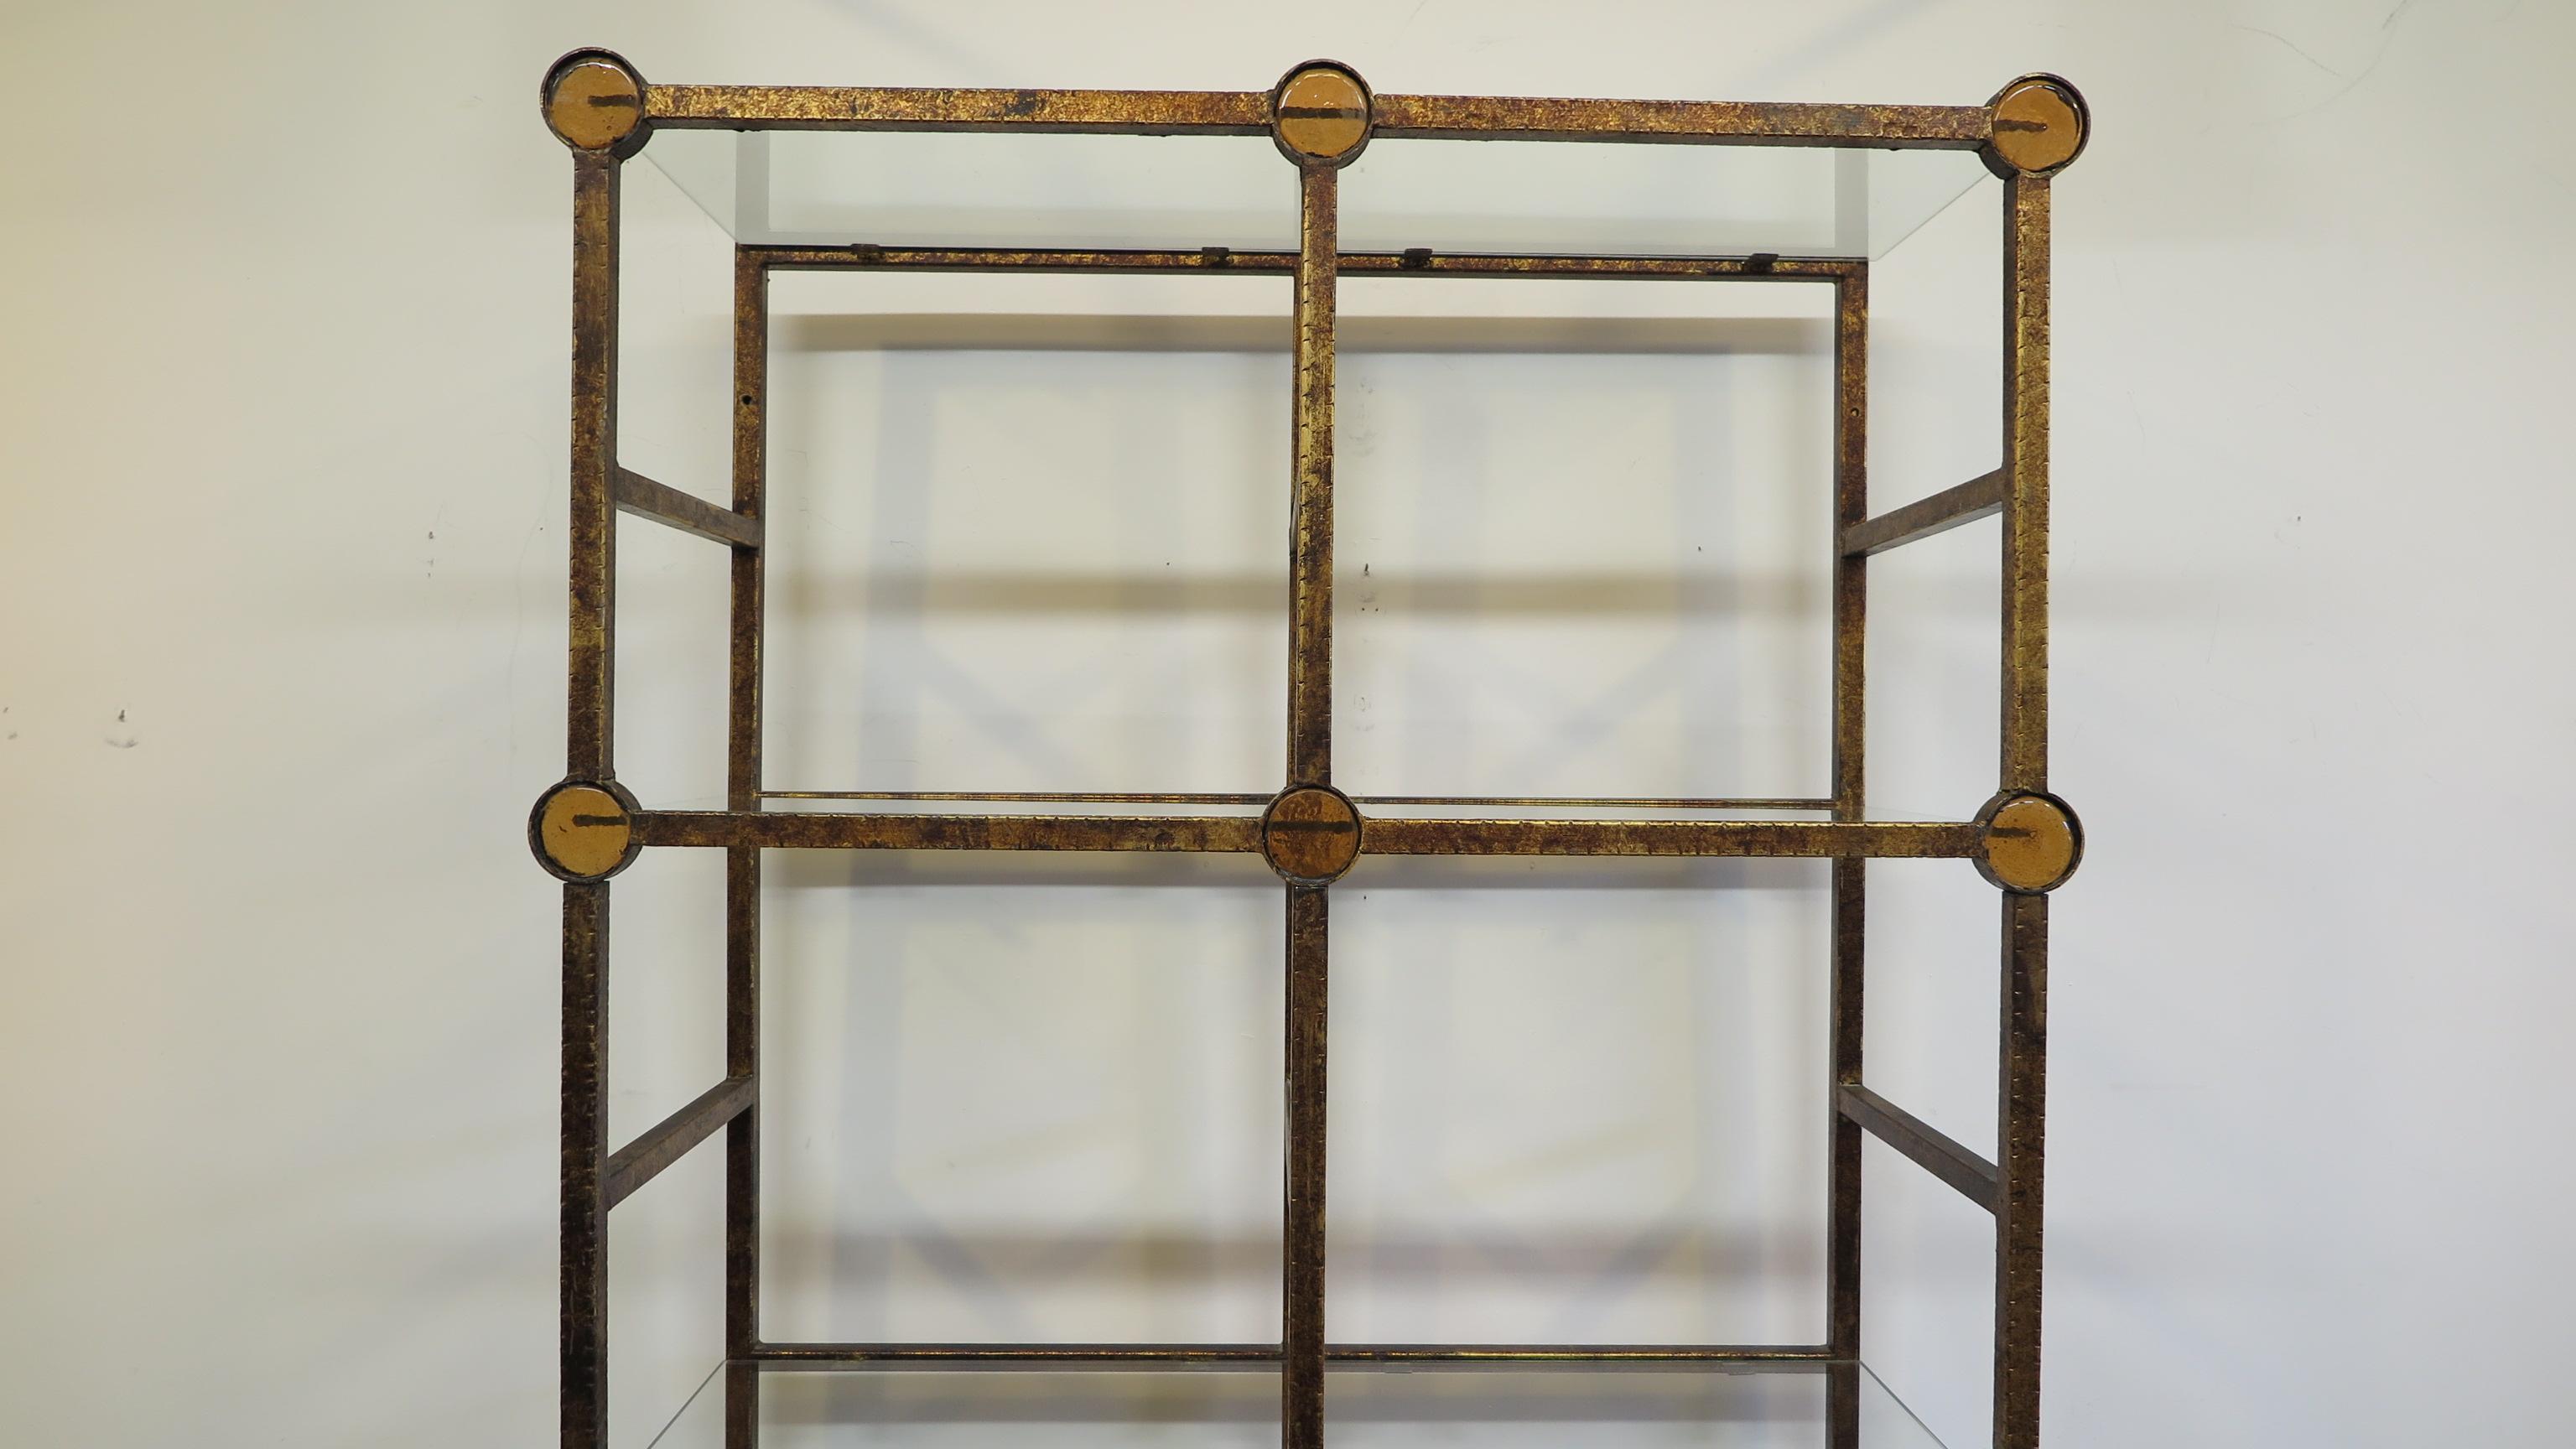 Italian midcentury etagere. Steel with gilt antique finish frame detailed with circular artisan amber toned glass roundels having six glass shelves. A Mid-Century Modern etagere. Very good condition.